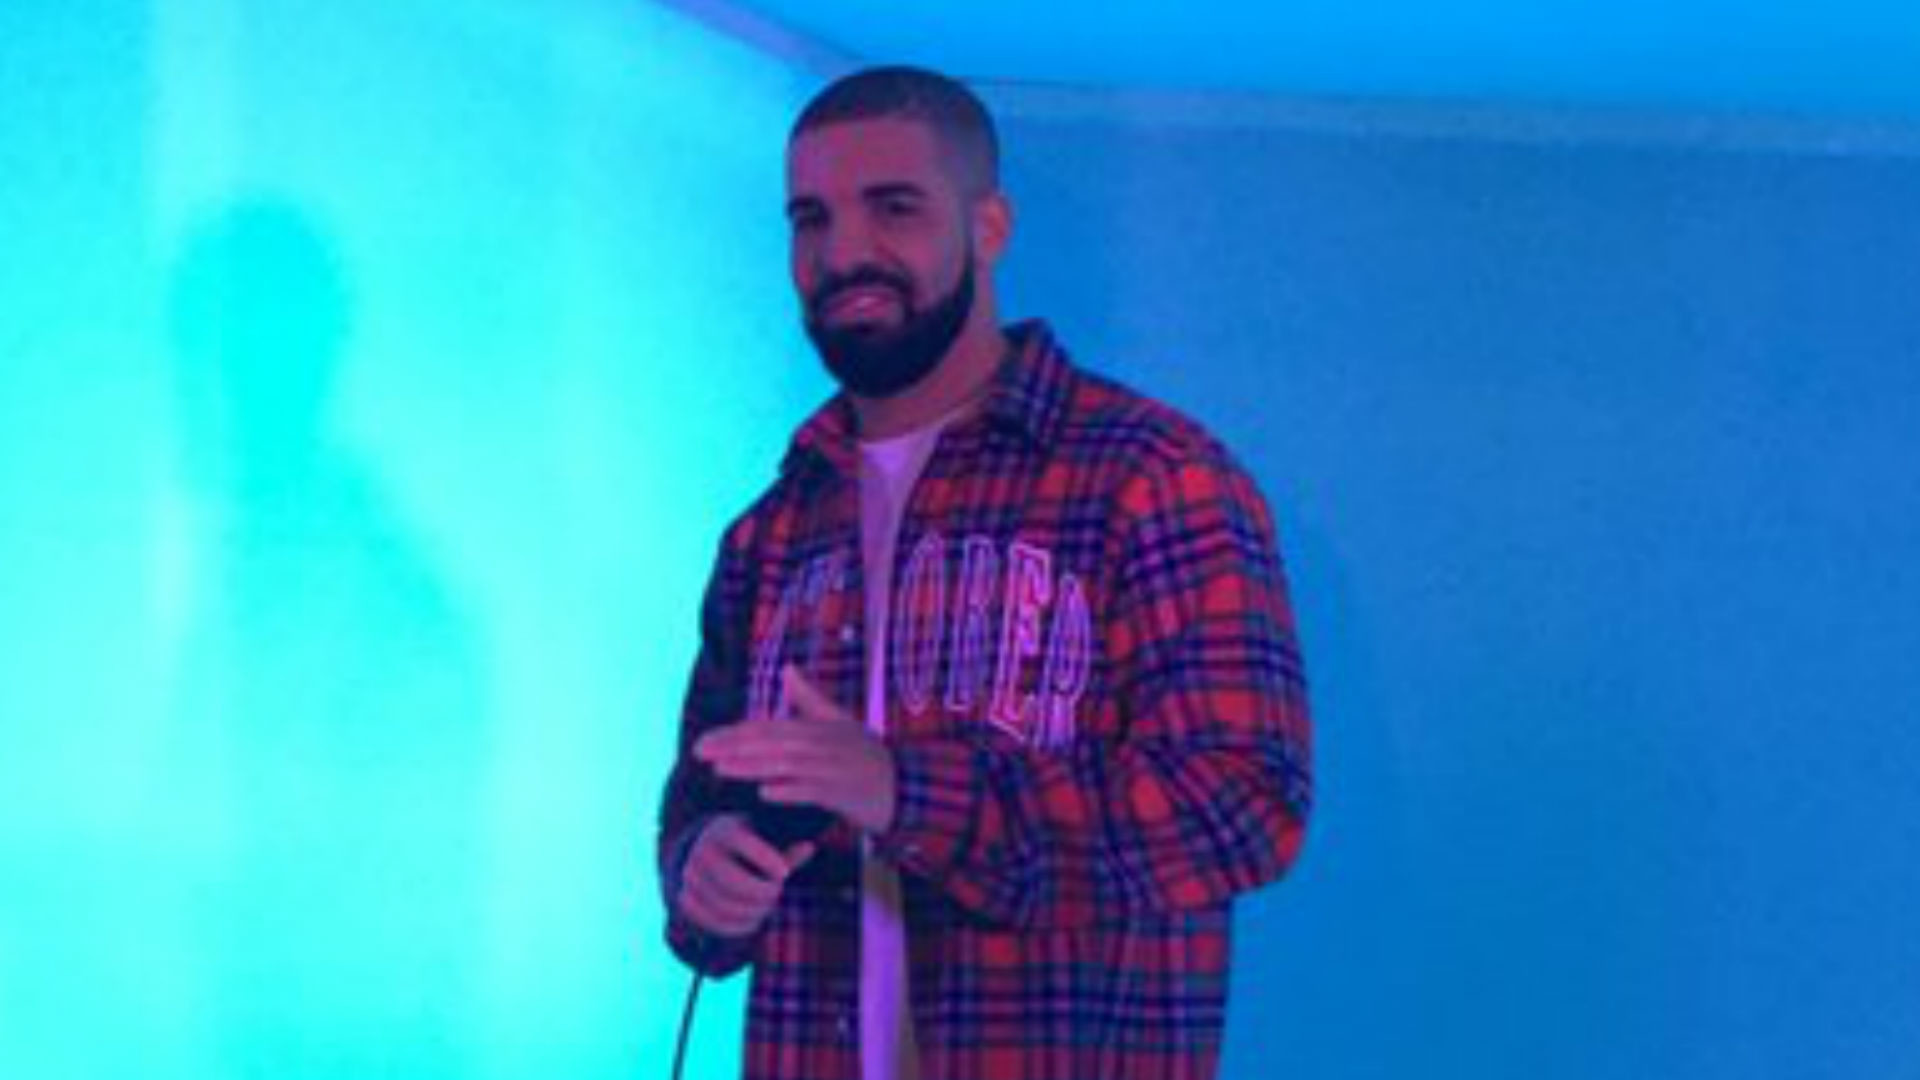 1920x1080 Raptors' Drake Night is a raging success thanks to a 'Hotline Bling' booth  | NBA | Sporting News